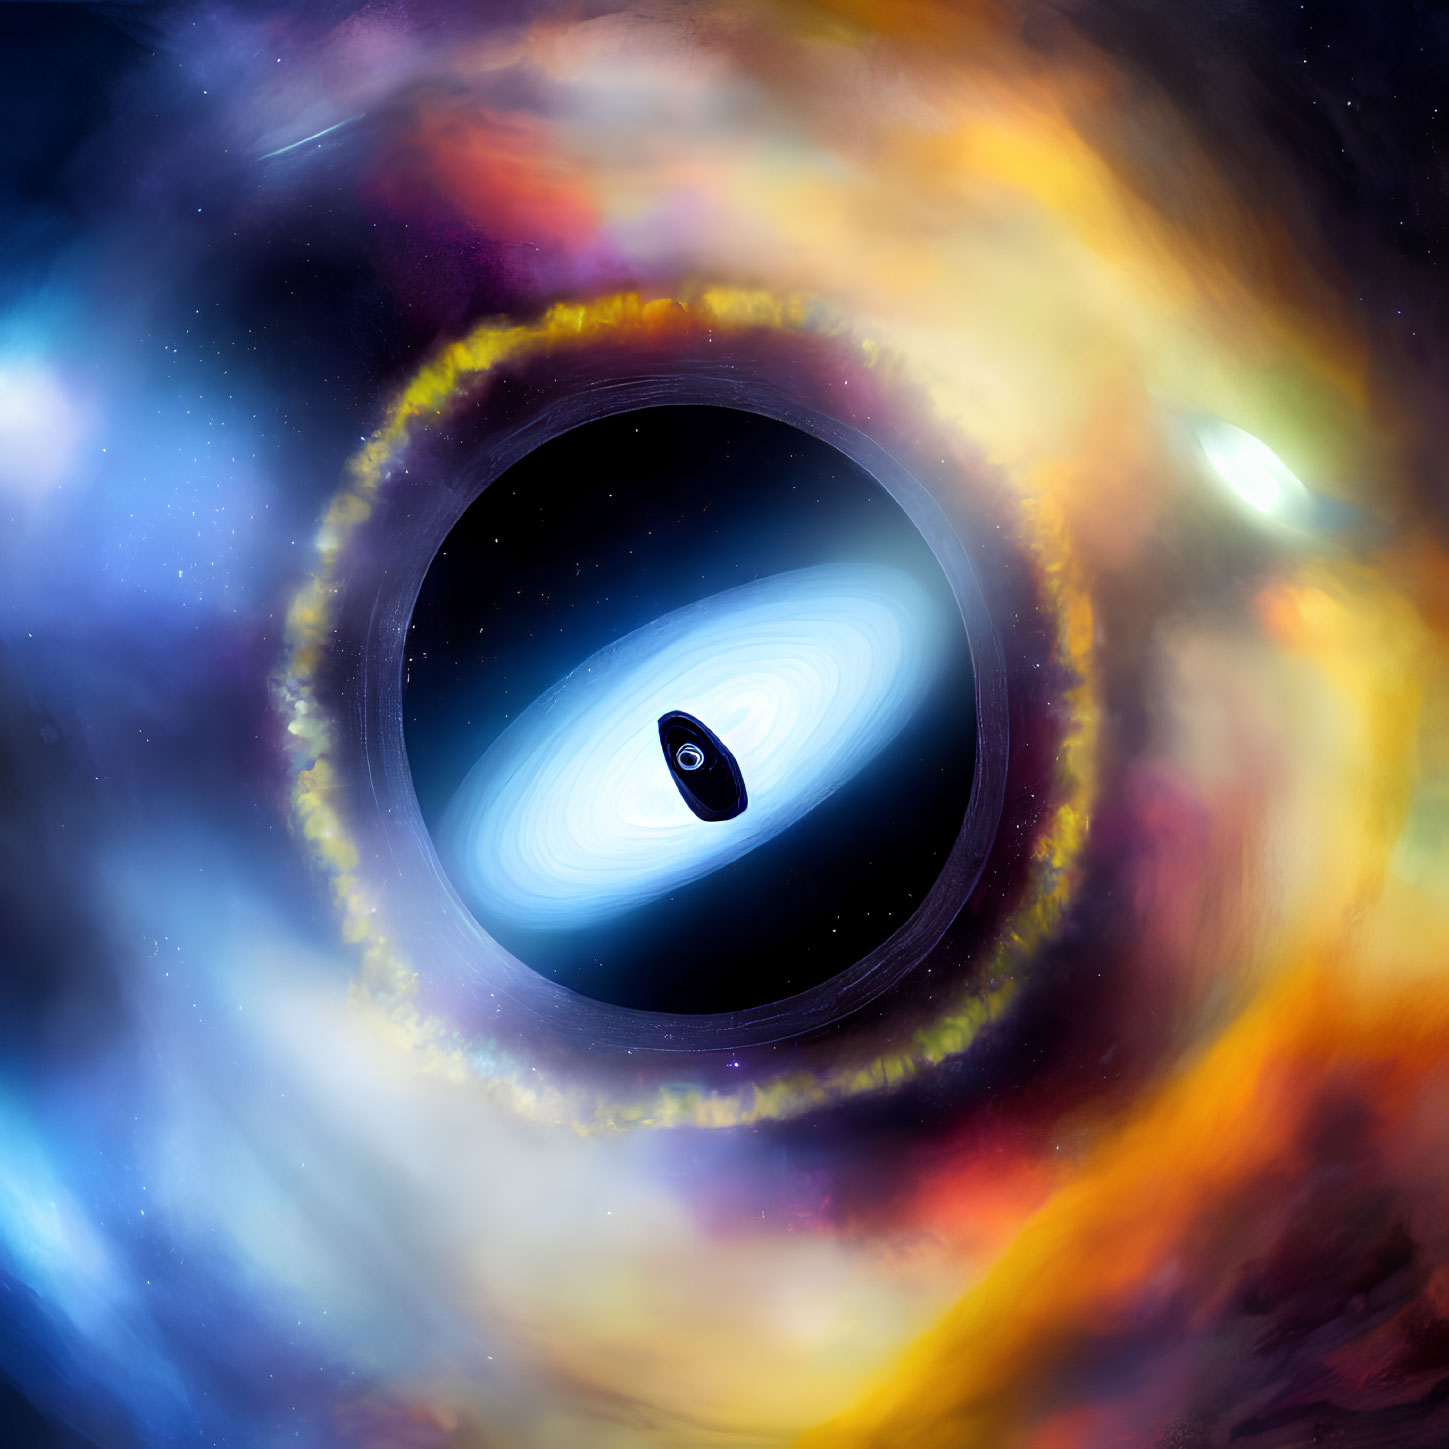 Black hole with accretion disk in colorful cosmic background.